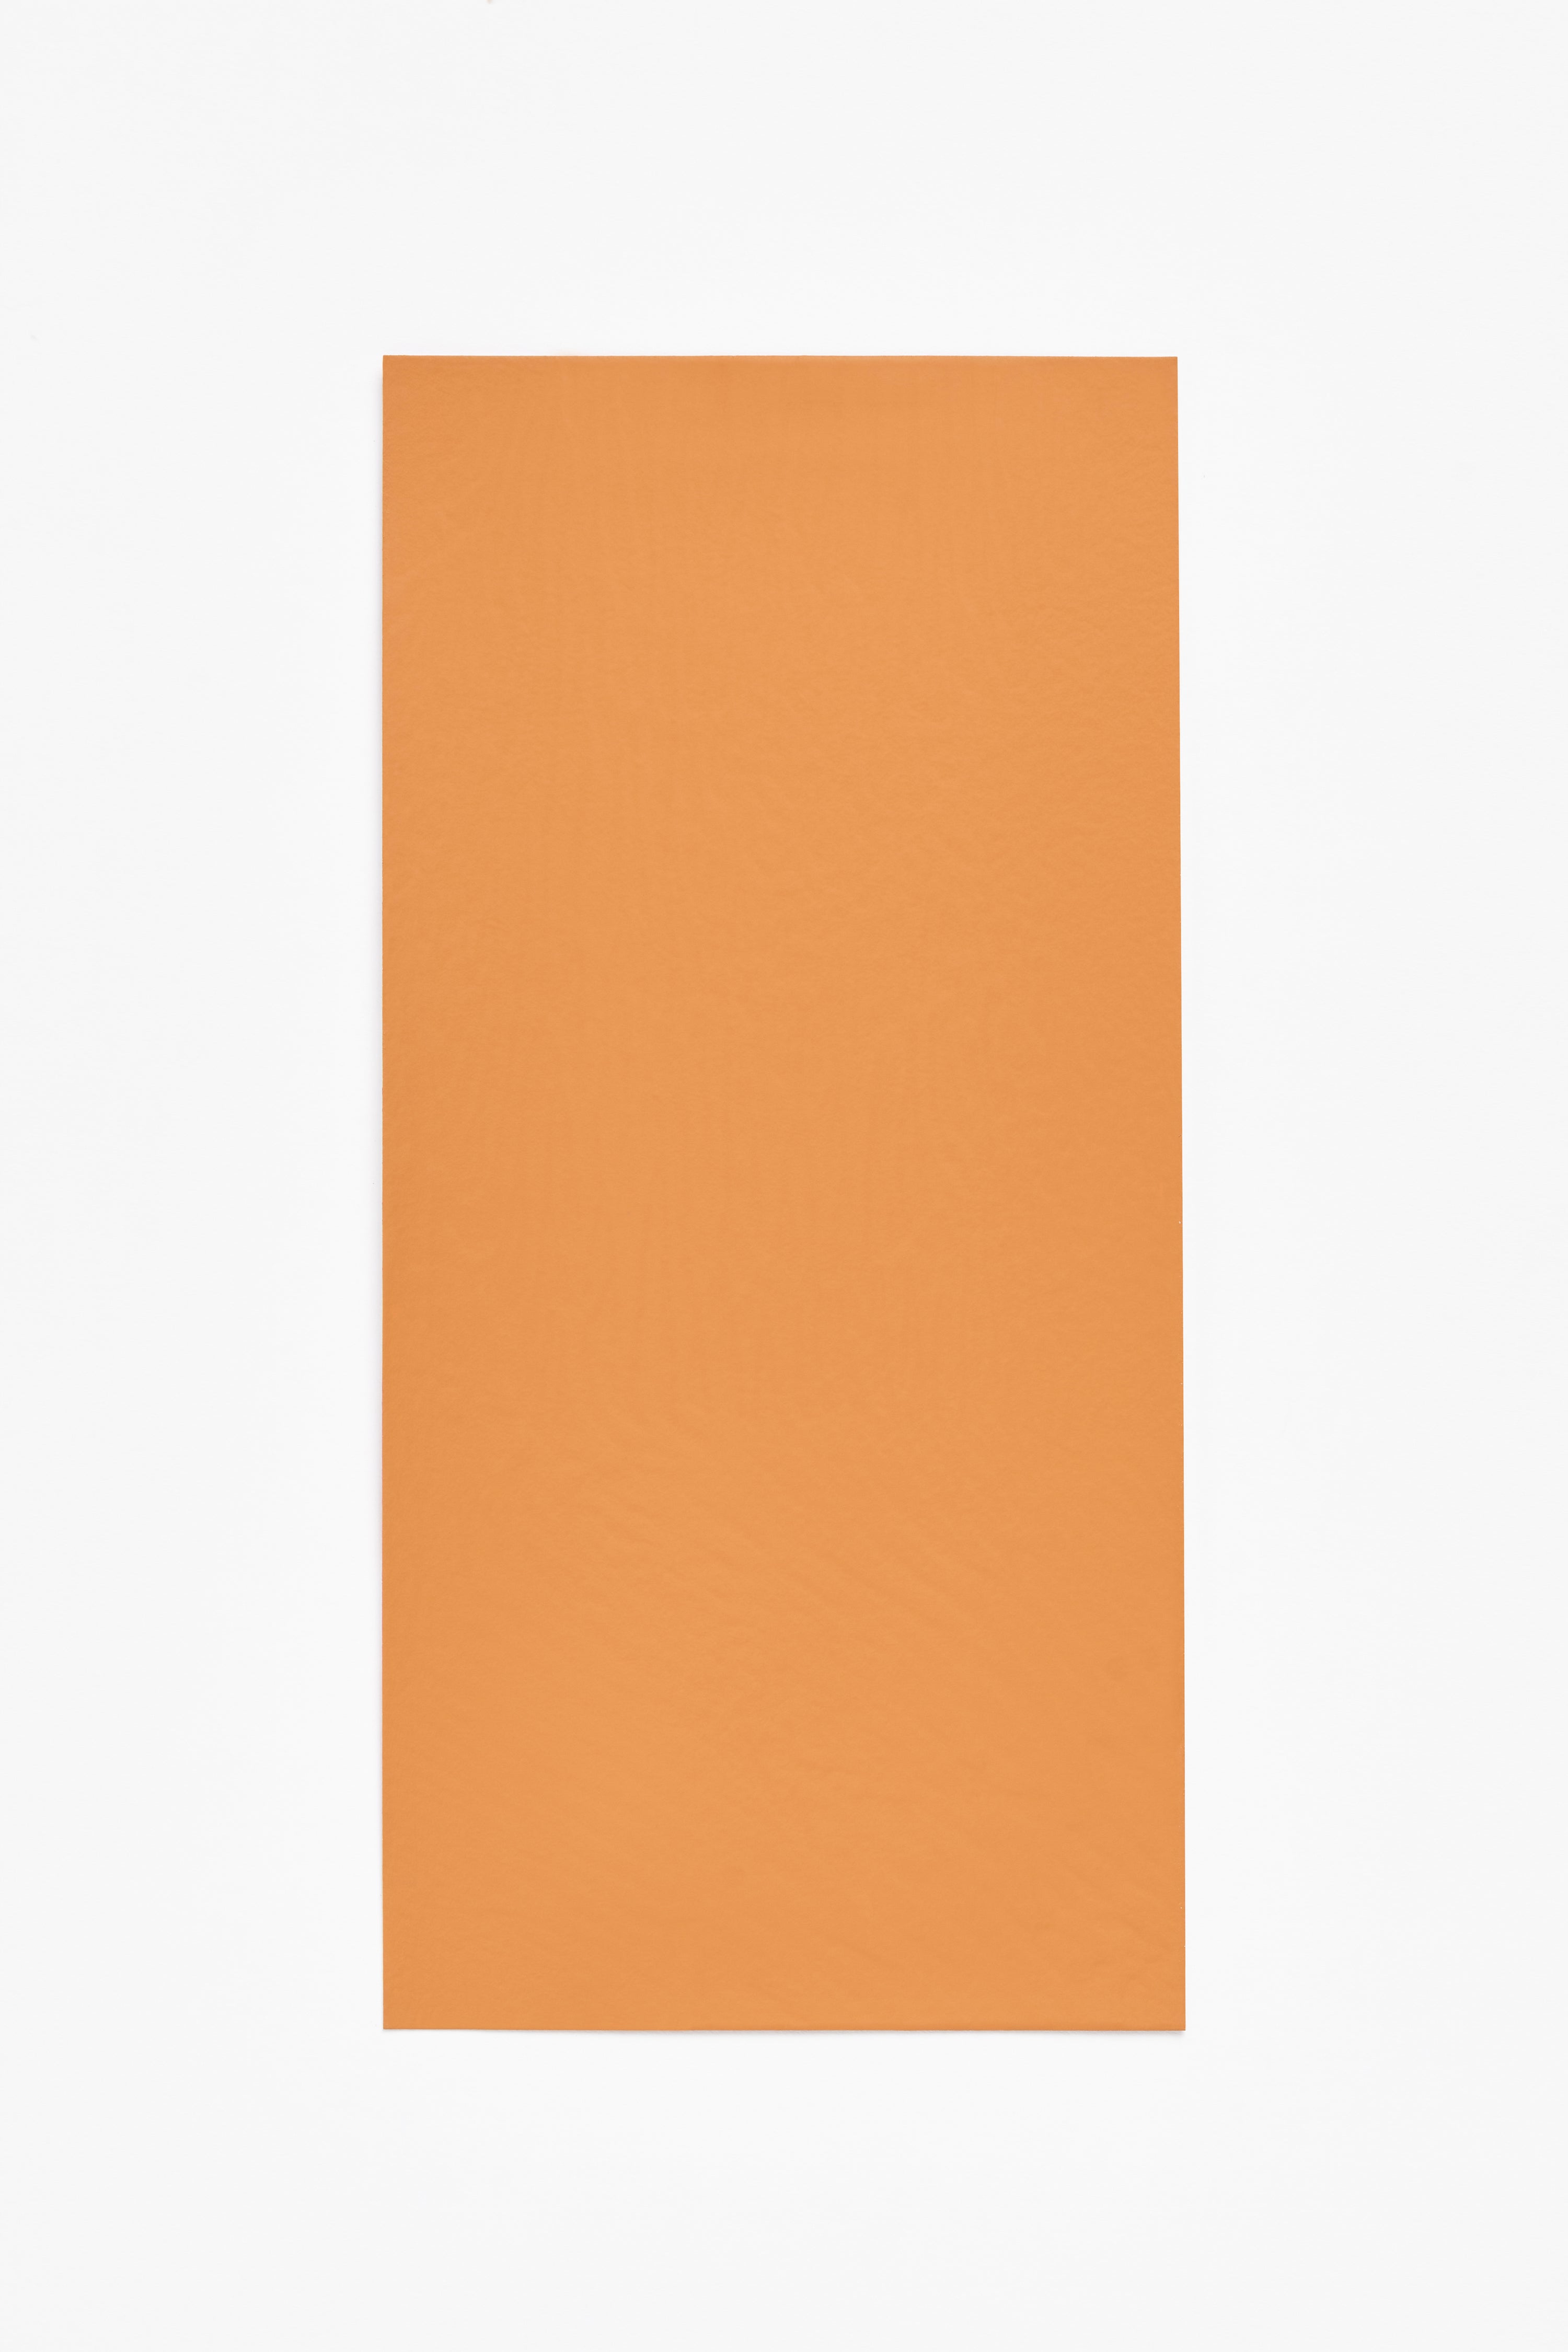 Vintage Ochre — a paint colour developed by Halleroed for Blēo